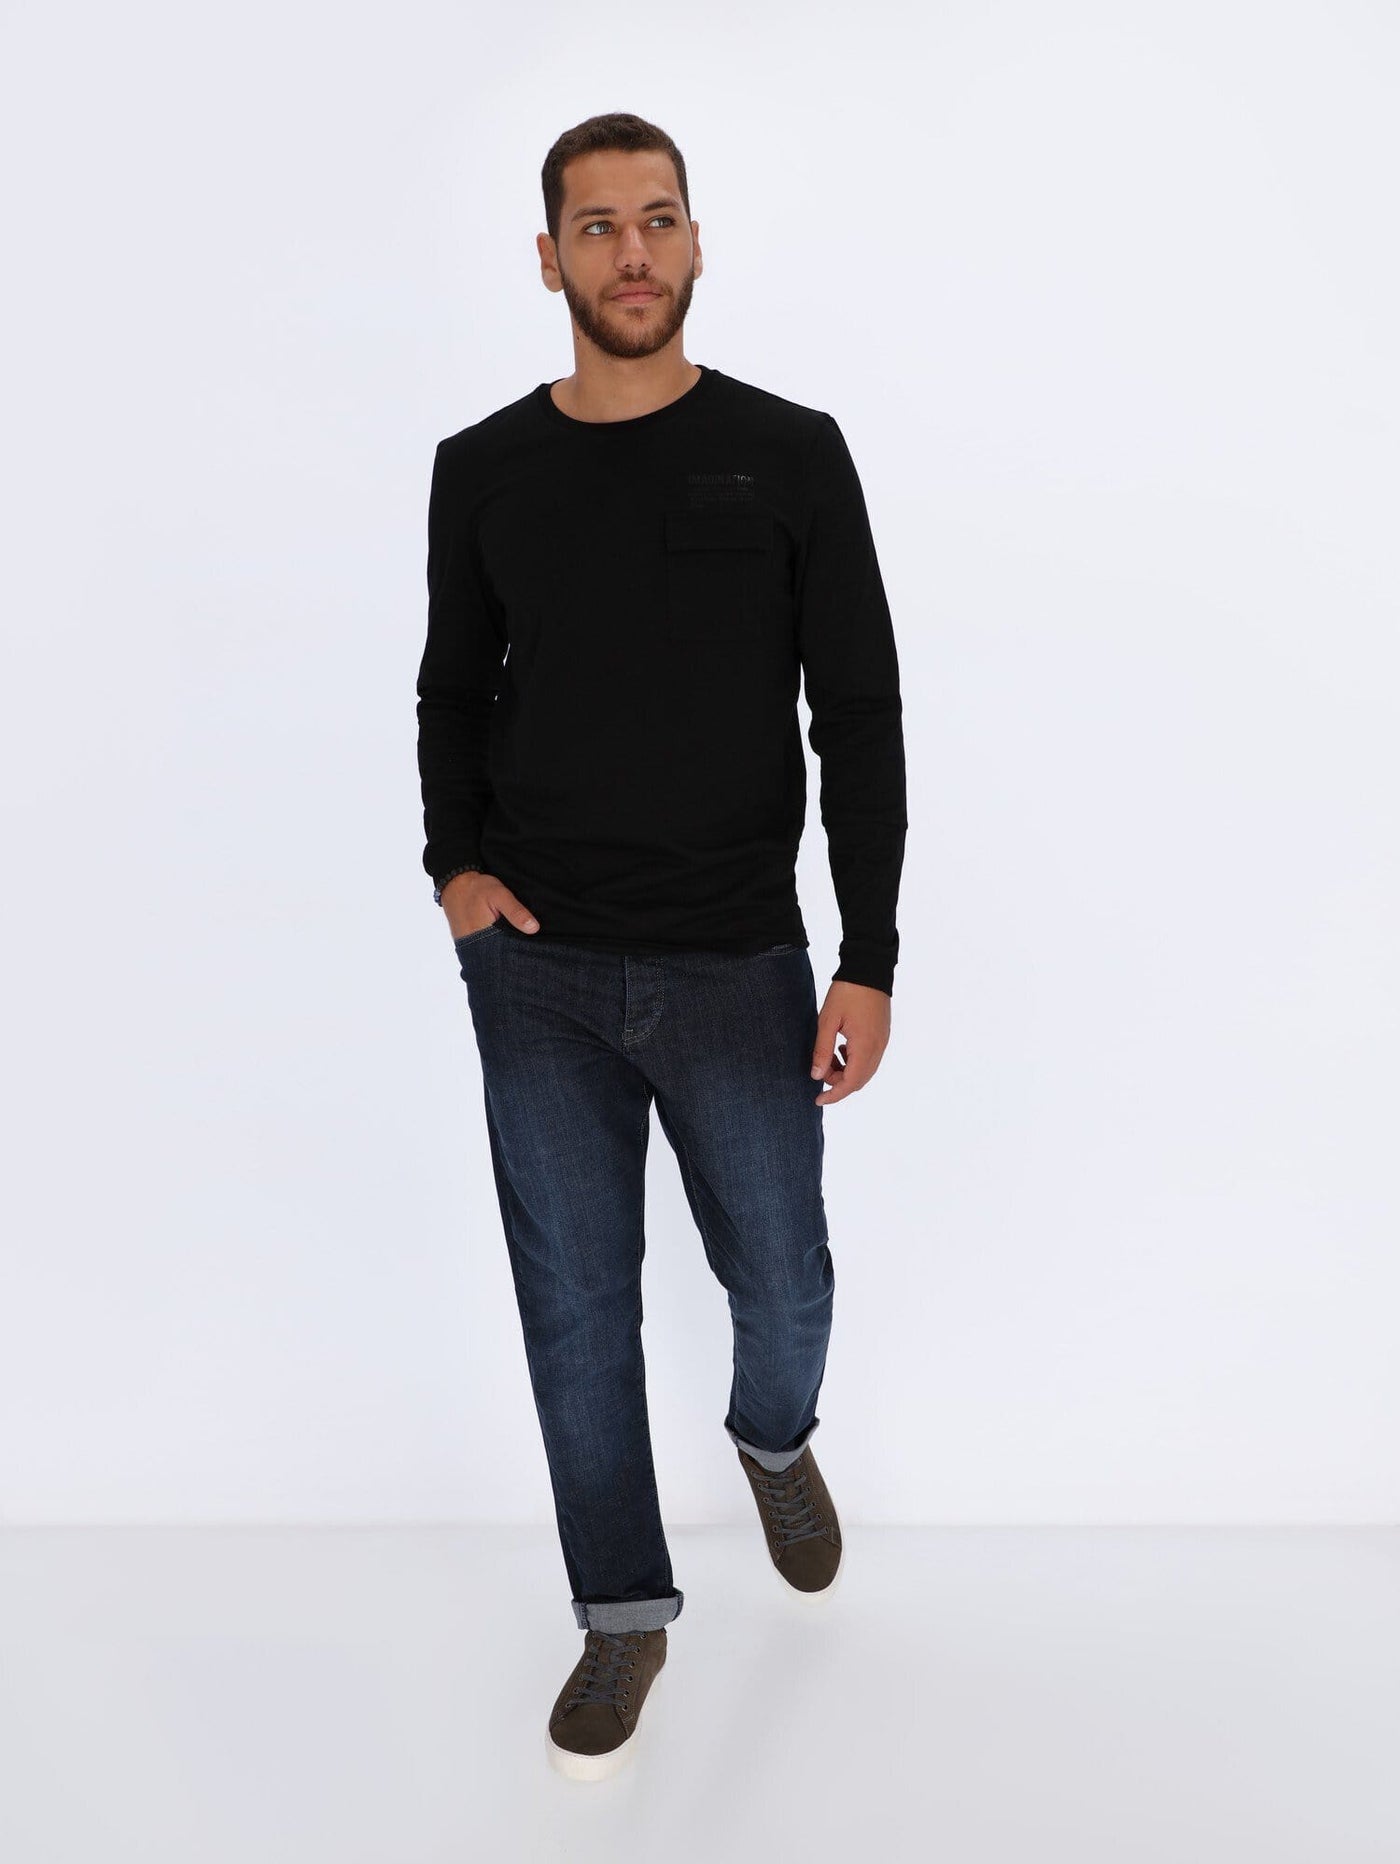 OR knitwear Long Sleeve T-shirt with Folded Chest Pocket